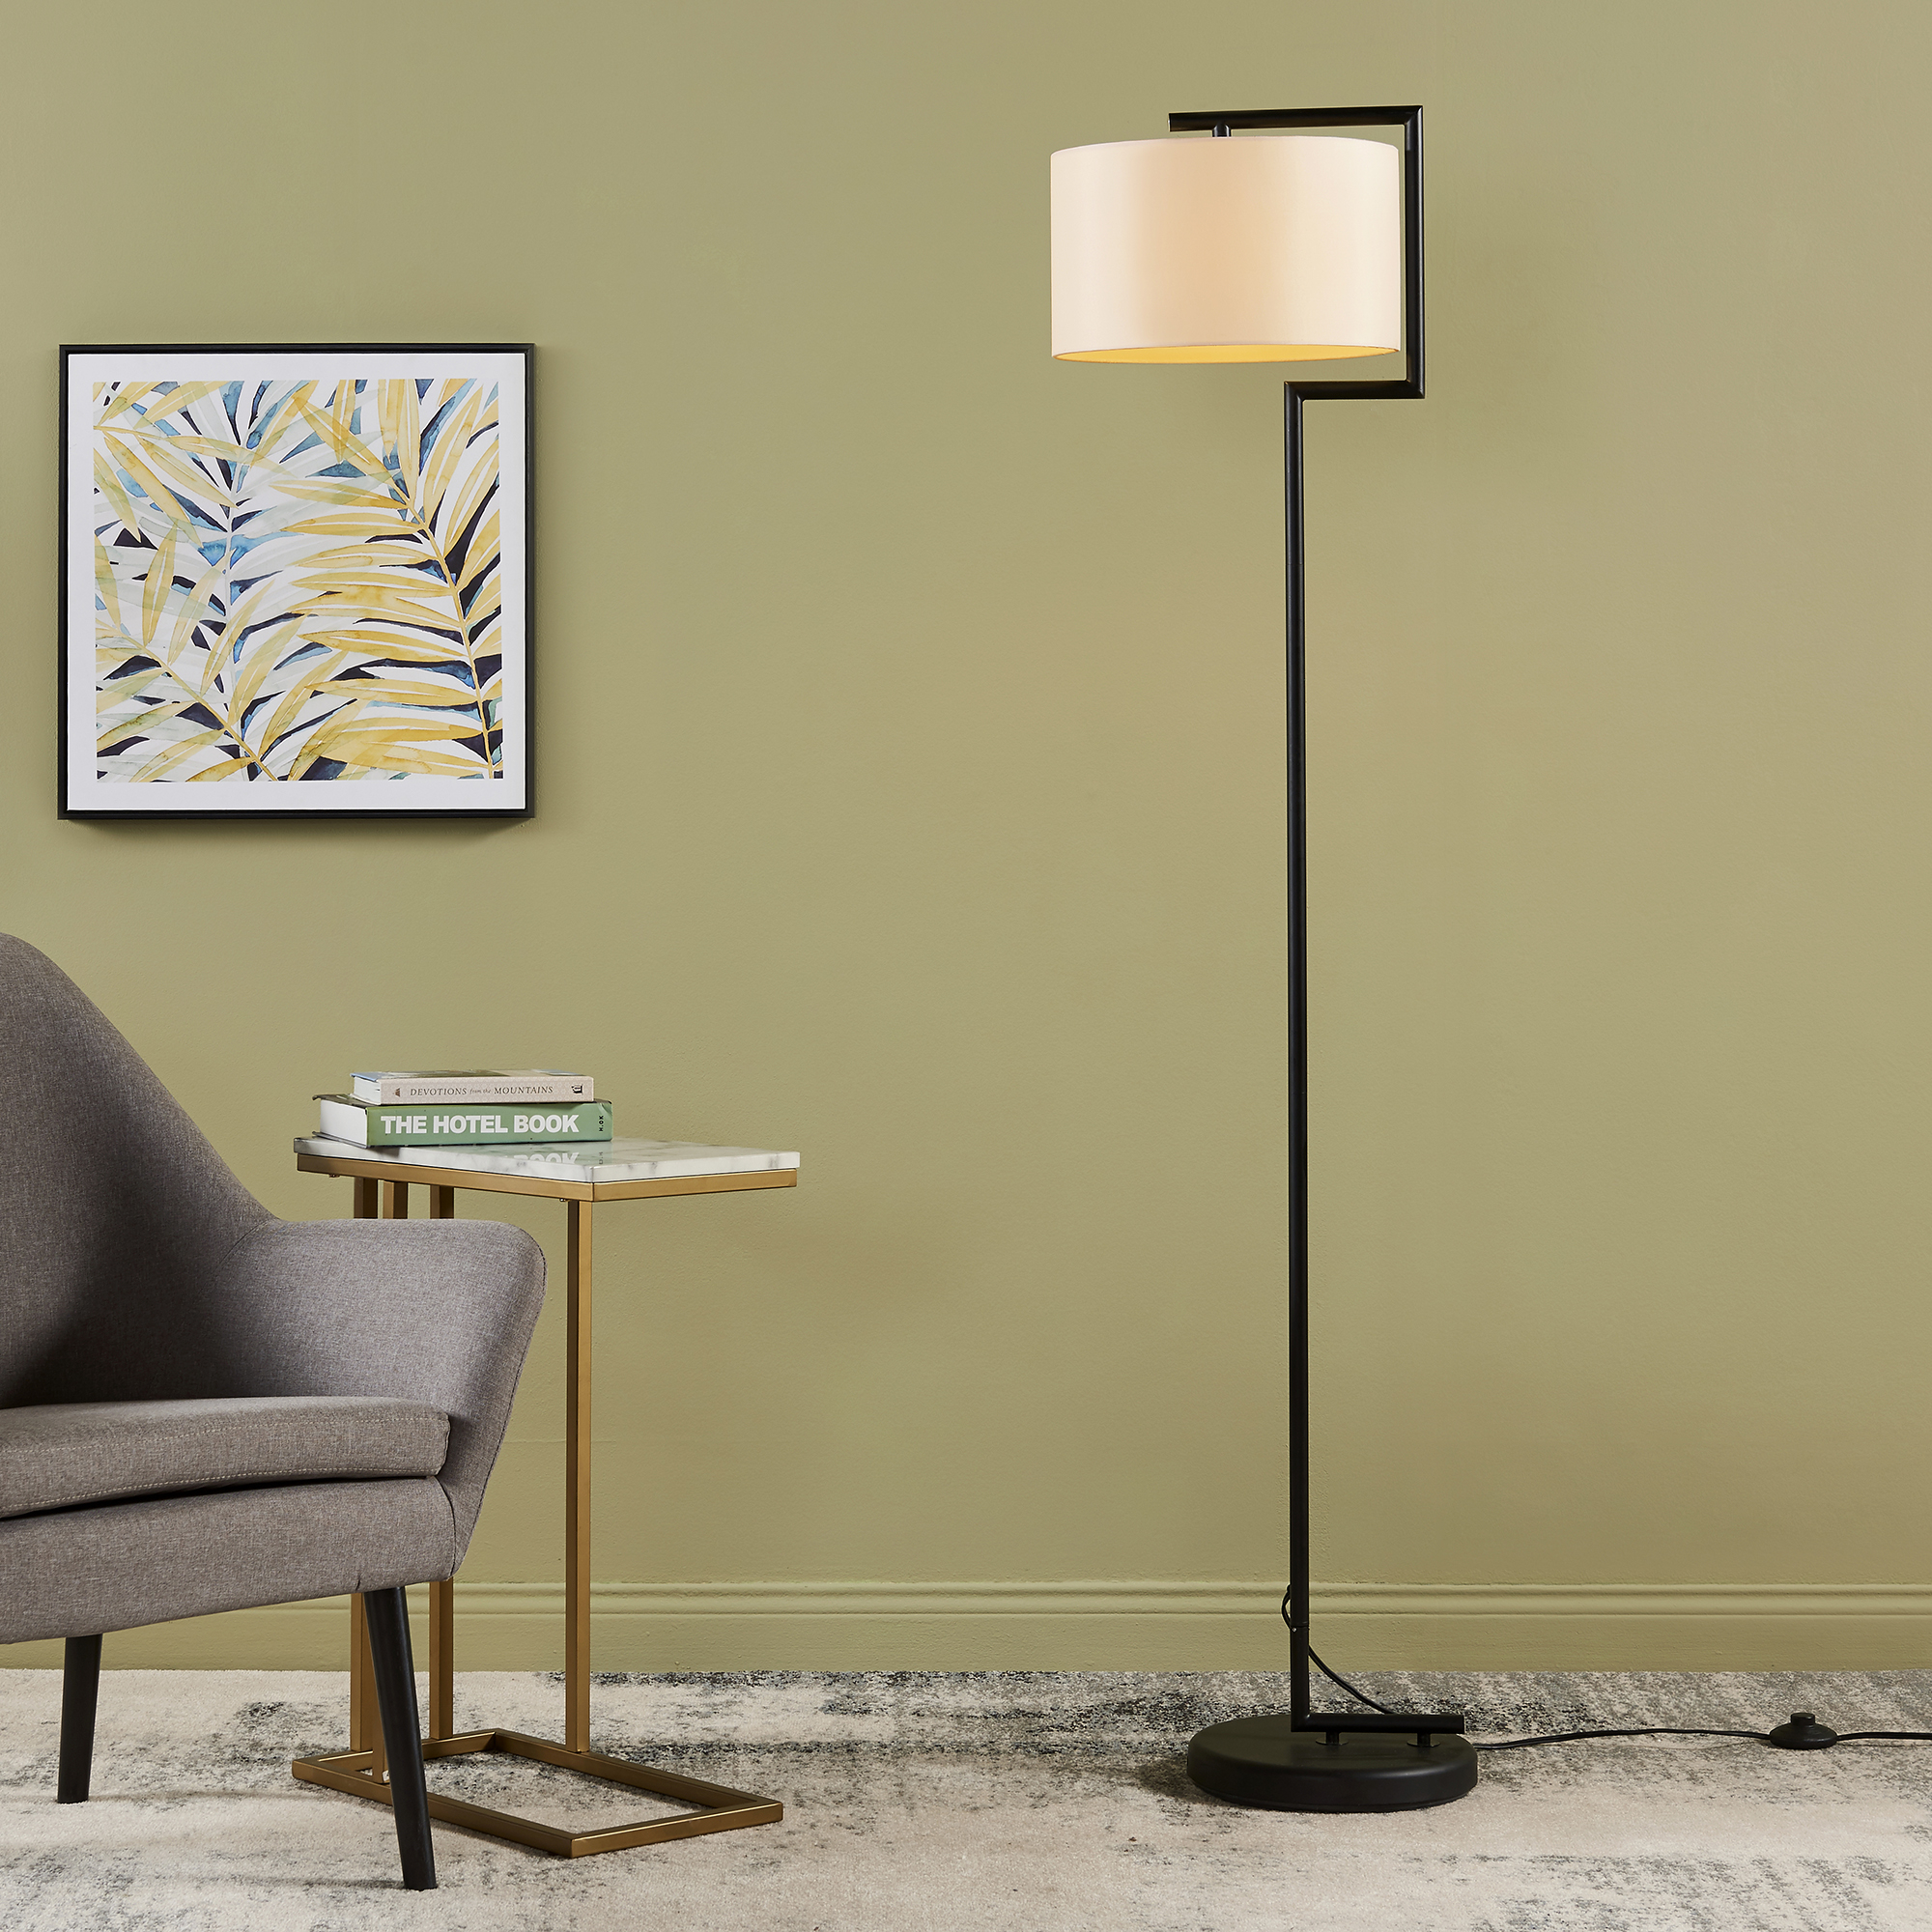 Oil Rubbed Bronze Bedroom Office Hykolity Traditional Swing Arm Floor Lamp Classic Lamp with Extending Arm Family Room Tall Floor Lamp for Living Room Soft Oatmeal Lamp Shade 